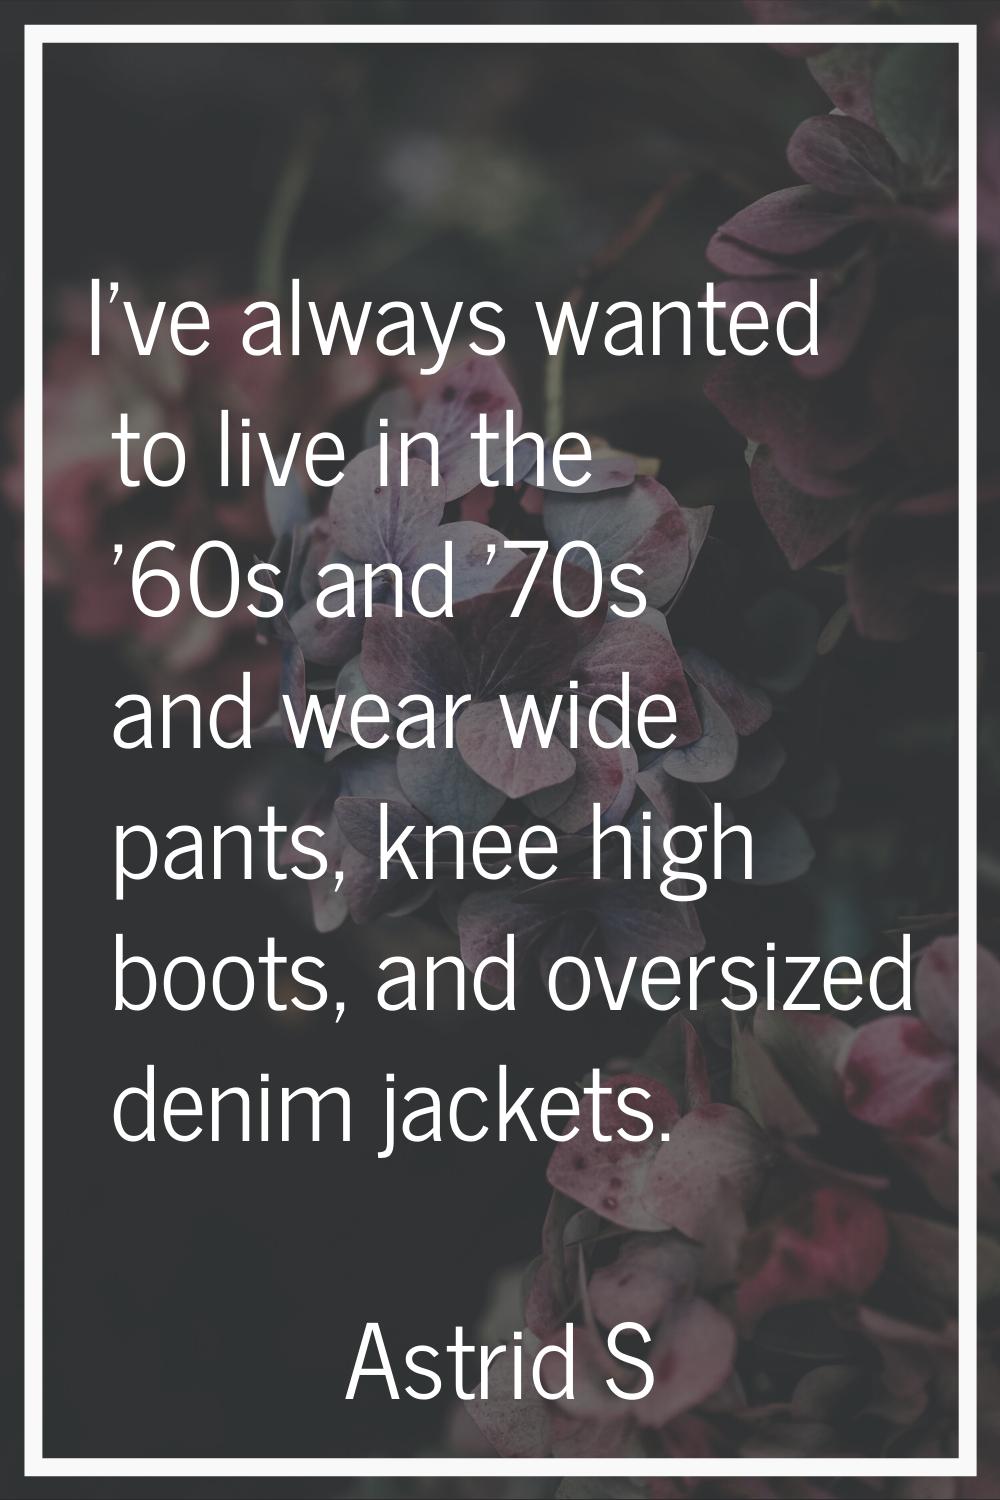 I've always wanted to live in the '60s and '70s and wear wide pants, knee high boots, and oversized